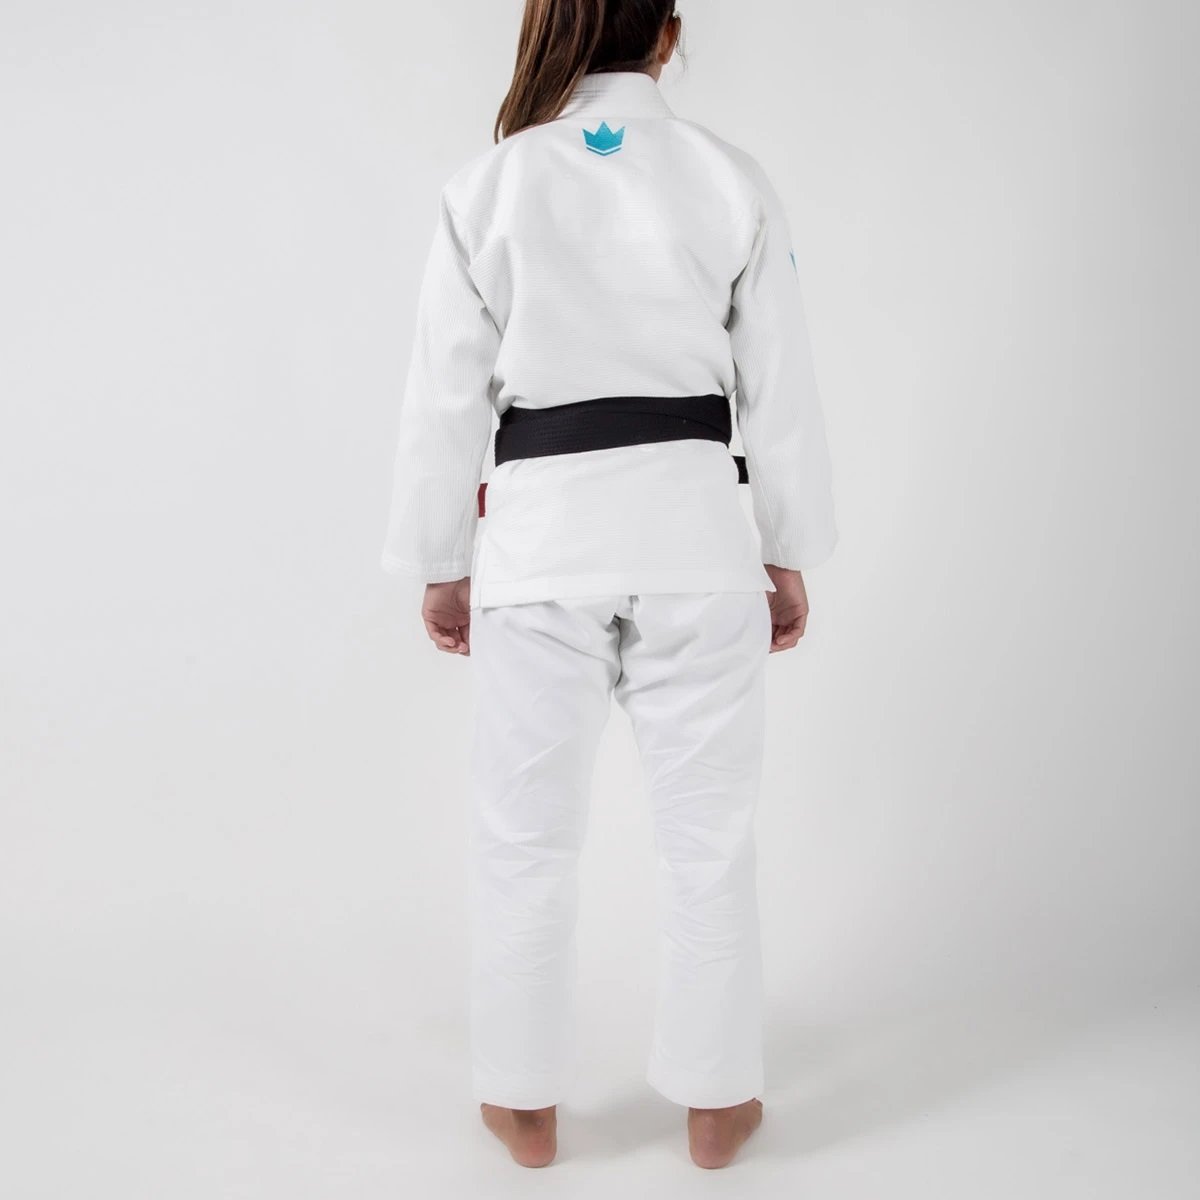 Ladies The One - With free white belt